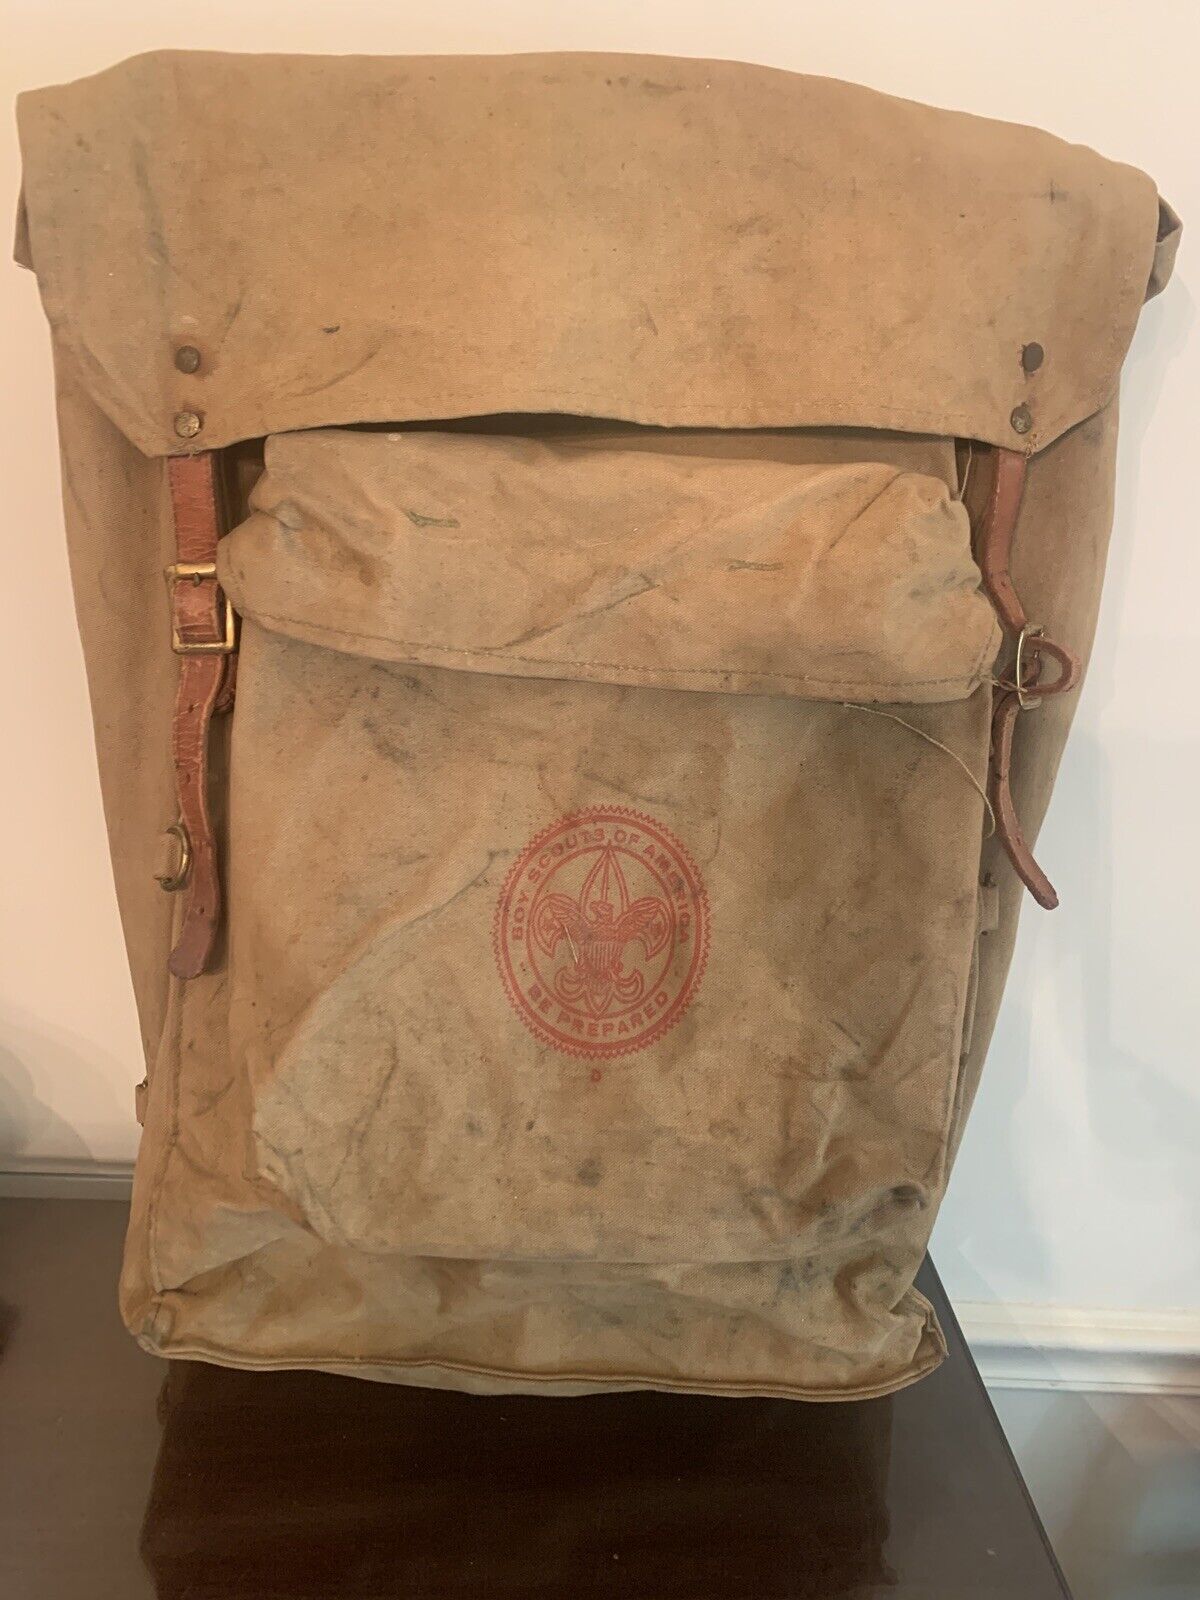 Vintage Boy Scout BSA Yucca Canvas Back Pack Diamond Brand #1329 With Utensils